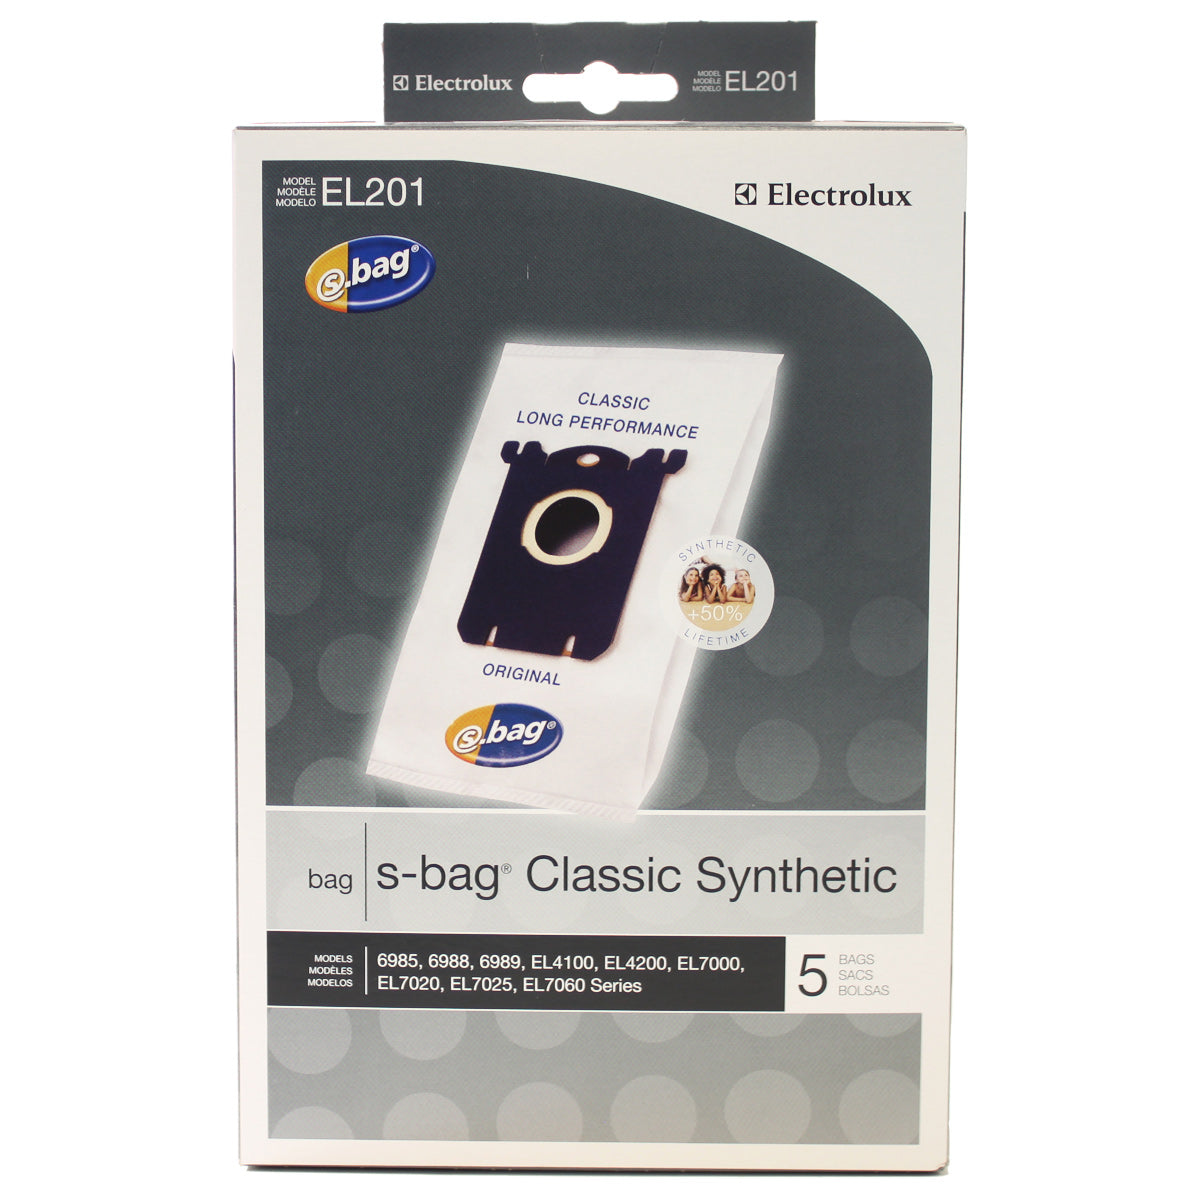 Electrolux S-bag Classic Synthetic bags 5pk